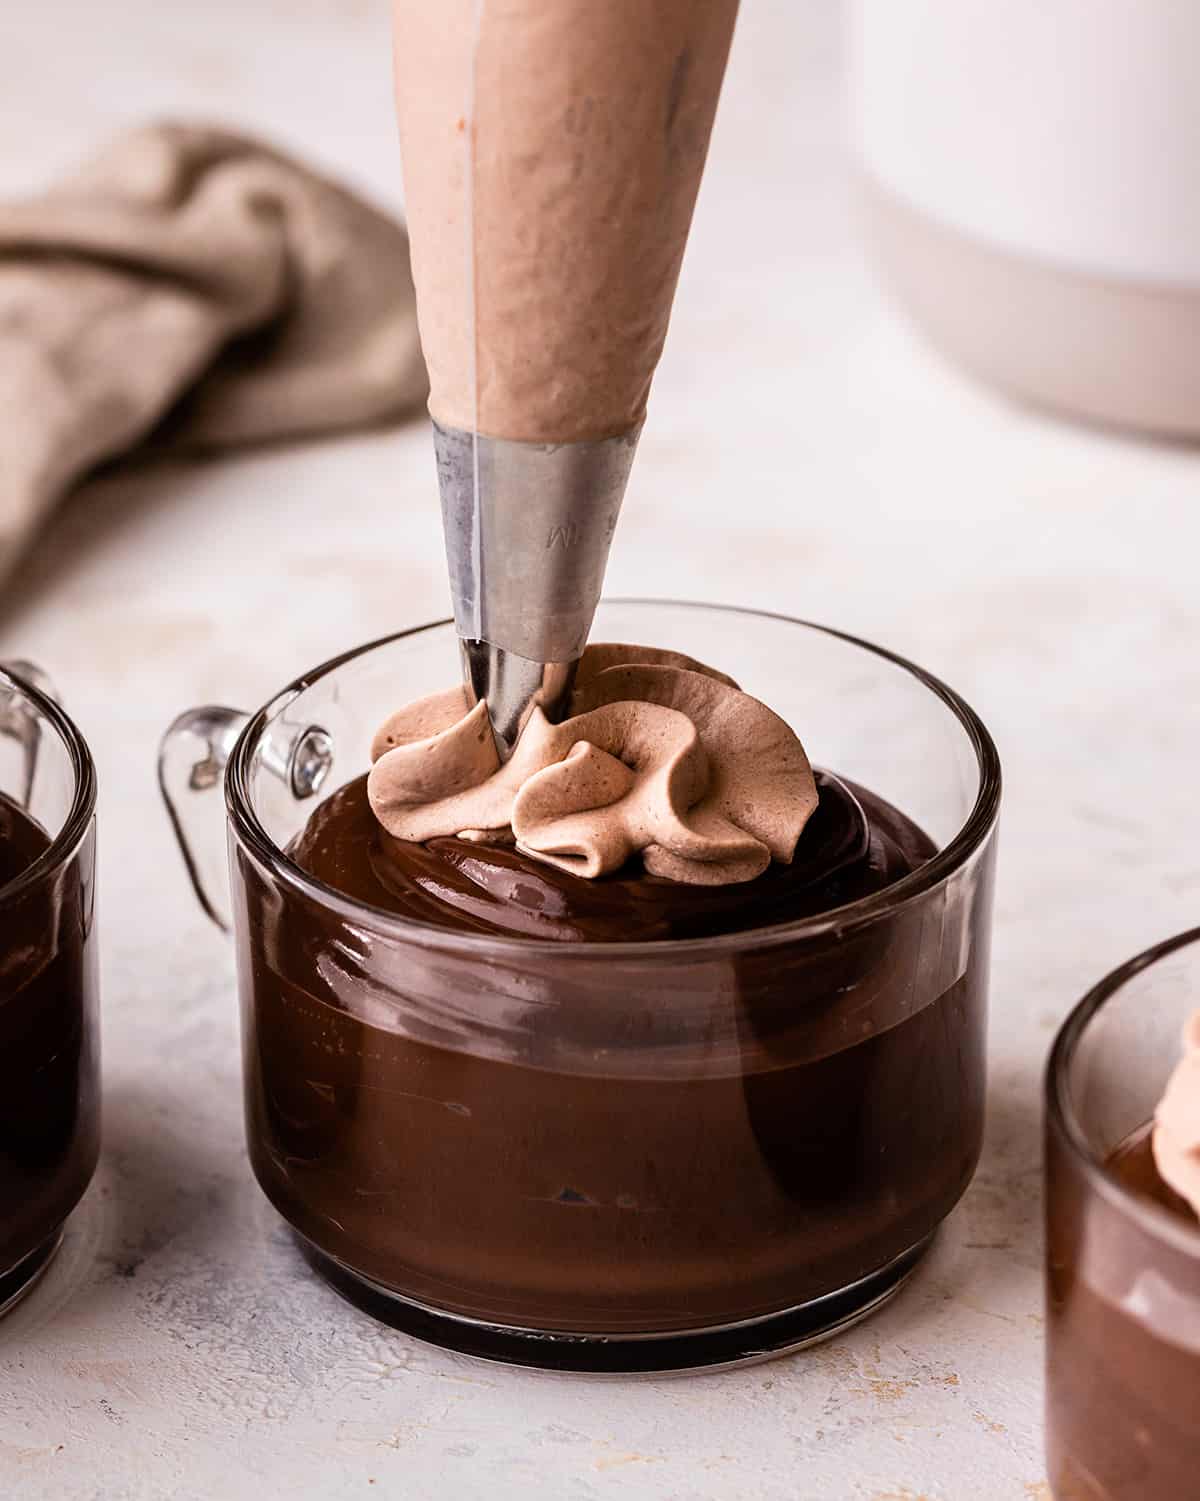 Chocolate Whipped Cream in a piping bag being piped onto chocolate pudding in a glass cup